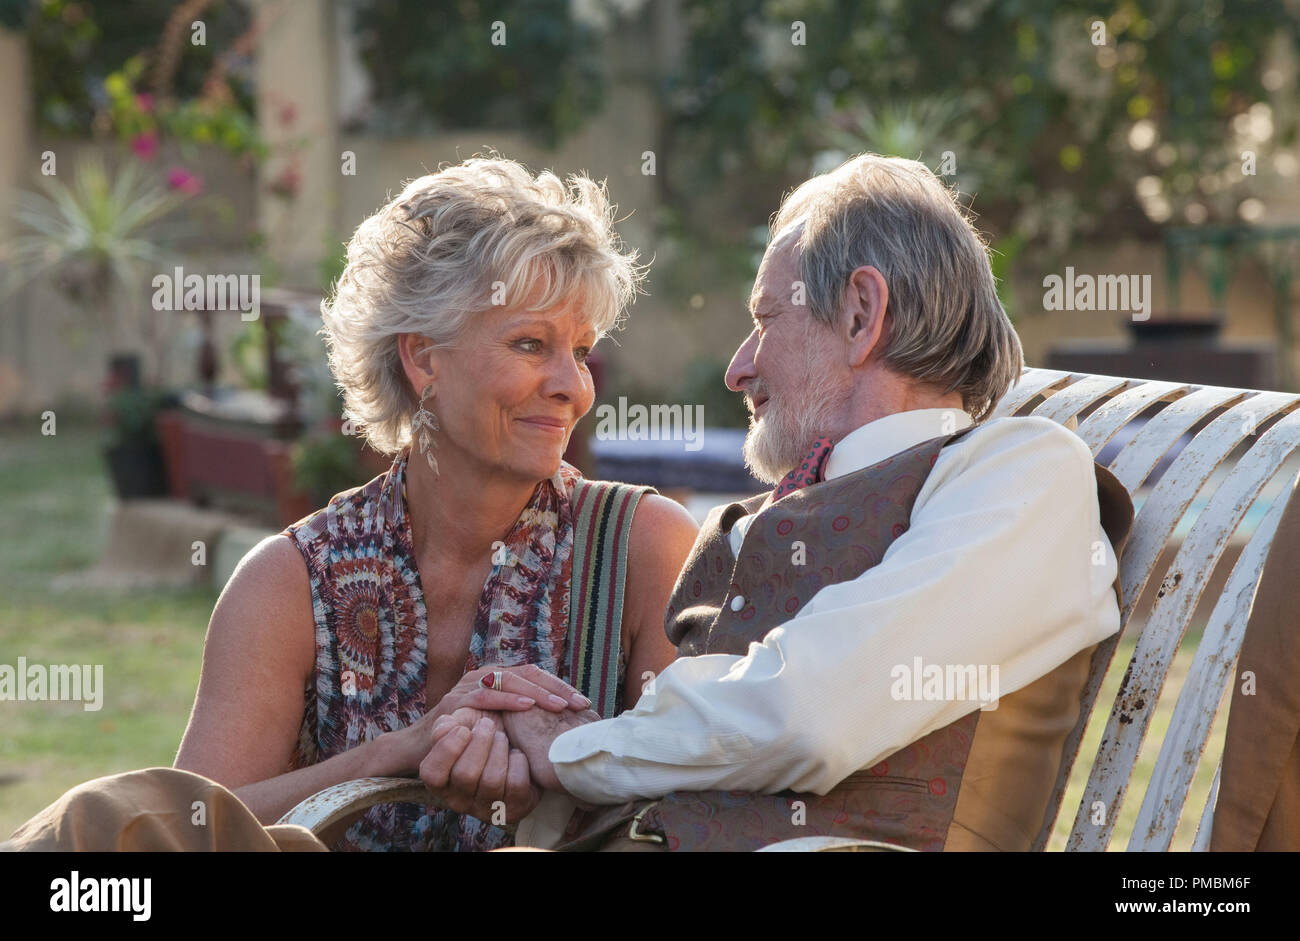 Diana Hardcastle as 'Carol' and Ronald Pickup as 'Norman Cousins' in THE BEST EXOTIC MARIGOLD HOTEL 2. Photo by: Laurie Sparham. Stock Photo